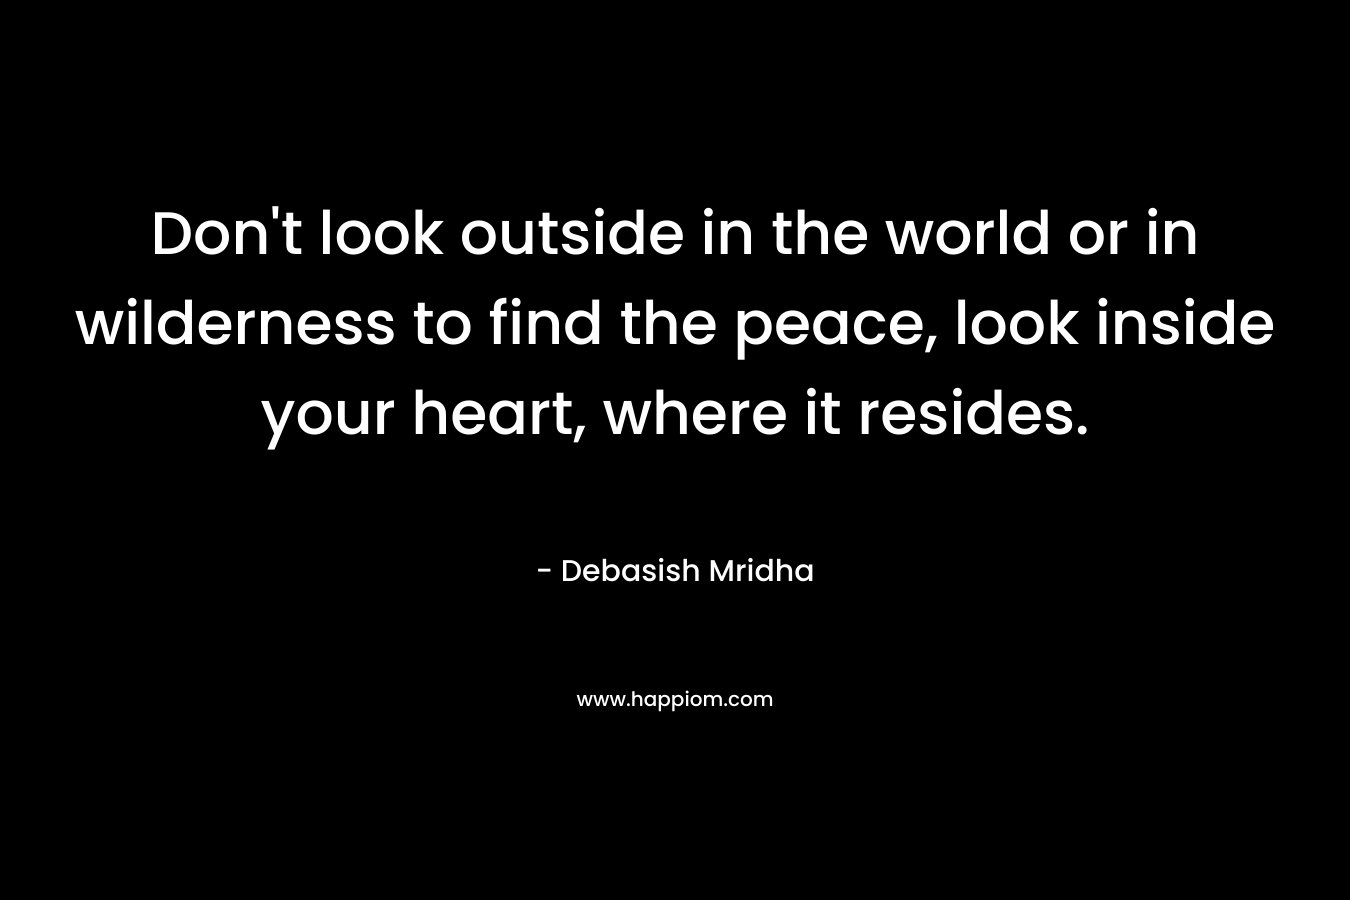 Don't look outside in the world or in wilderness to find the peace, look inside your heart, where it resides.